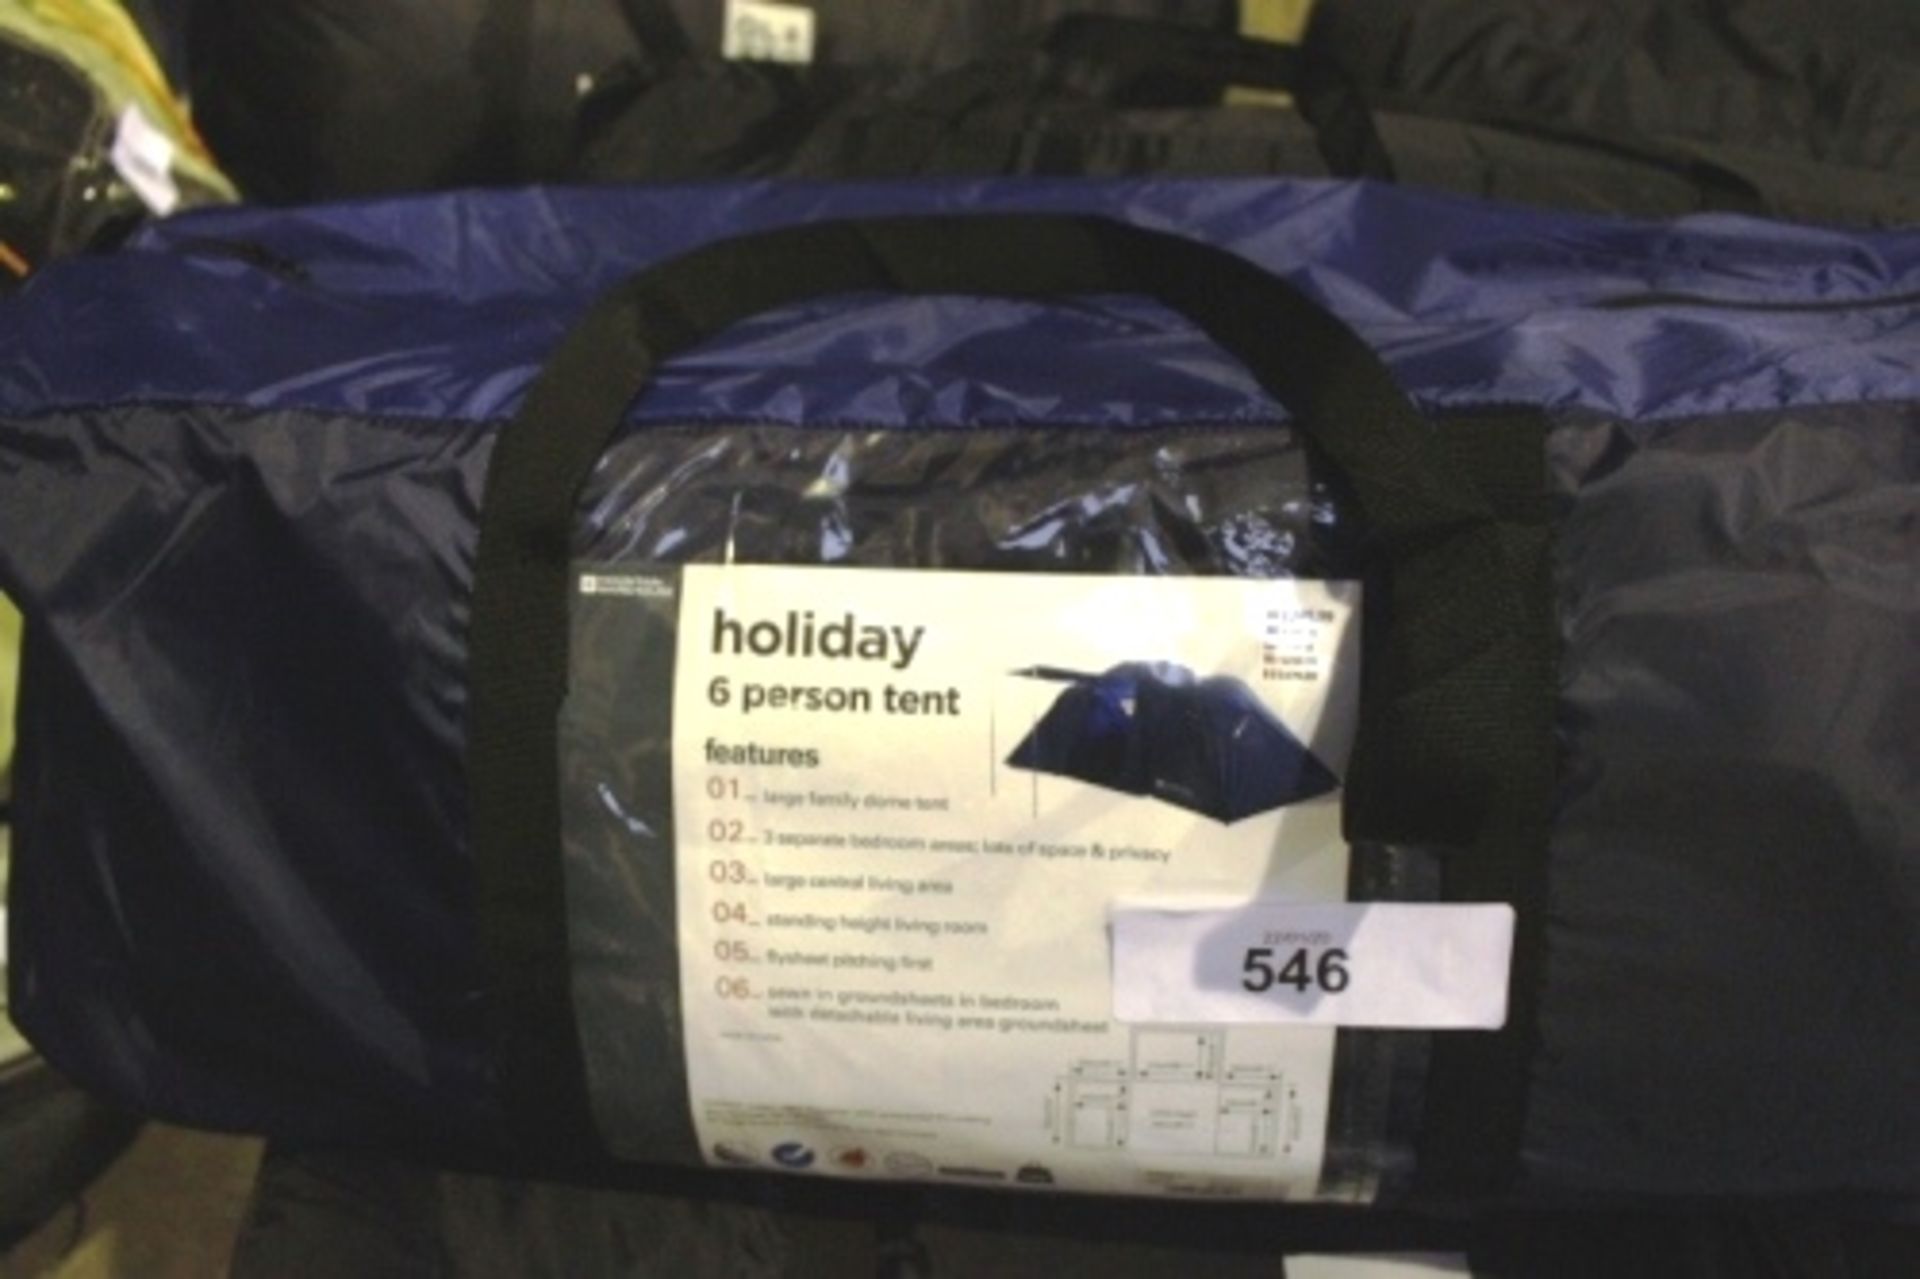 1 x Mountain Warehouse Holiday 6 6-person tent - New (ES10)